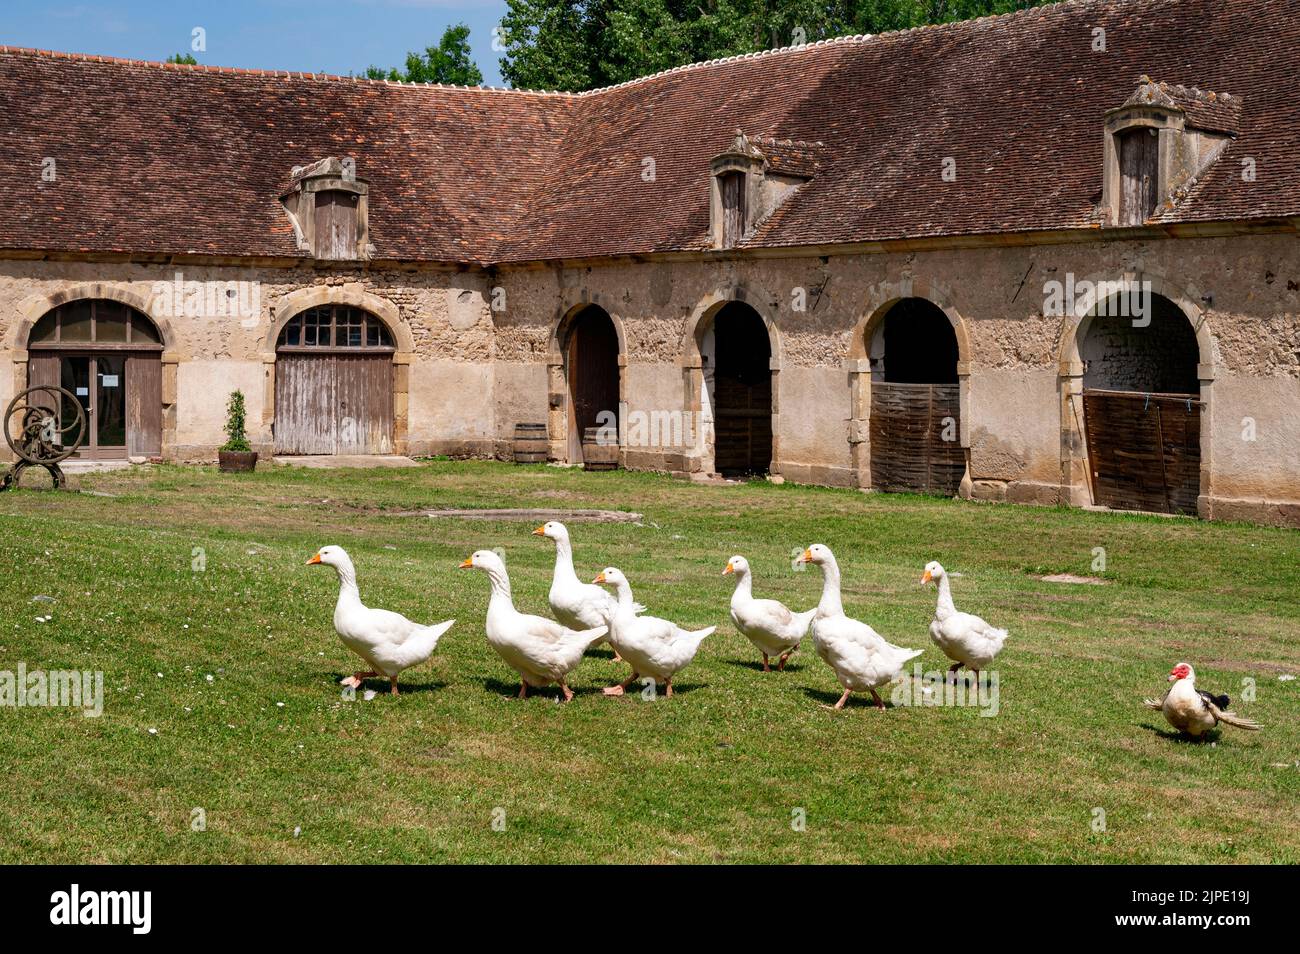 Geese running around in the yard of the Château de Sully, a castle in Burgundy owned by Madame la Duchesse de Magenta, Marquise de Mac Mahon Stock Photo